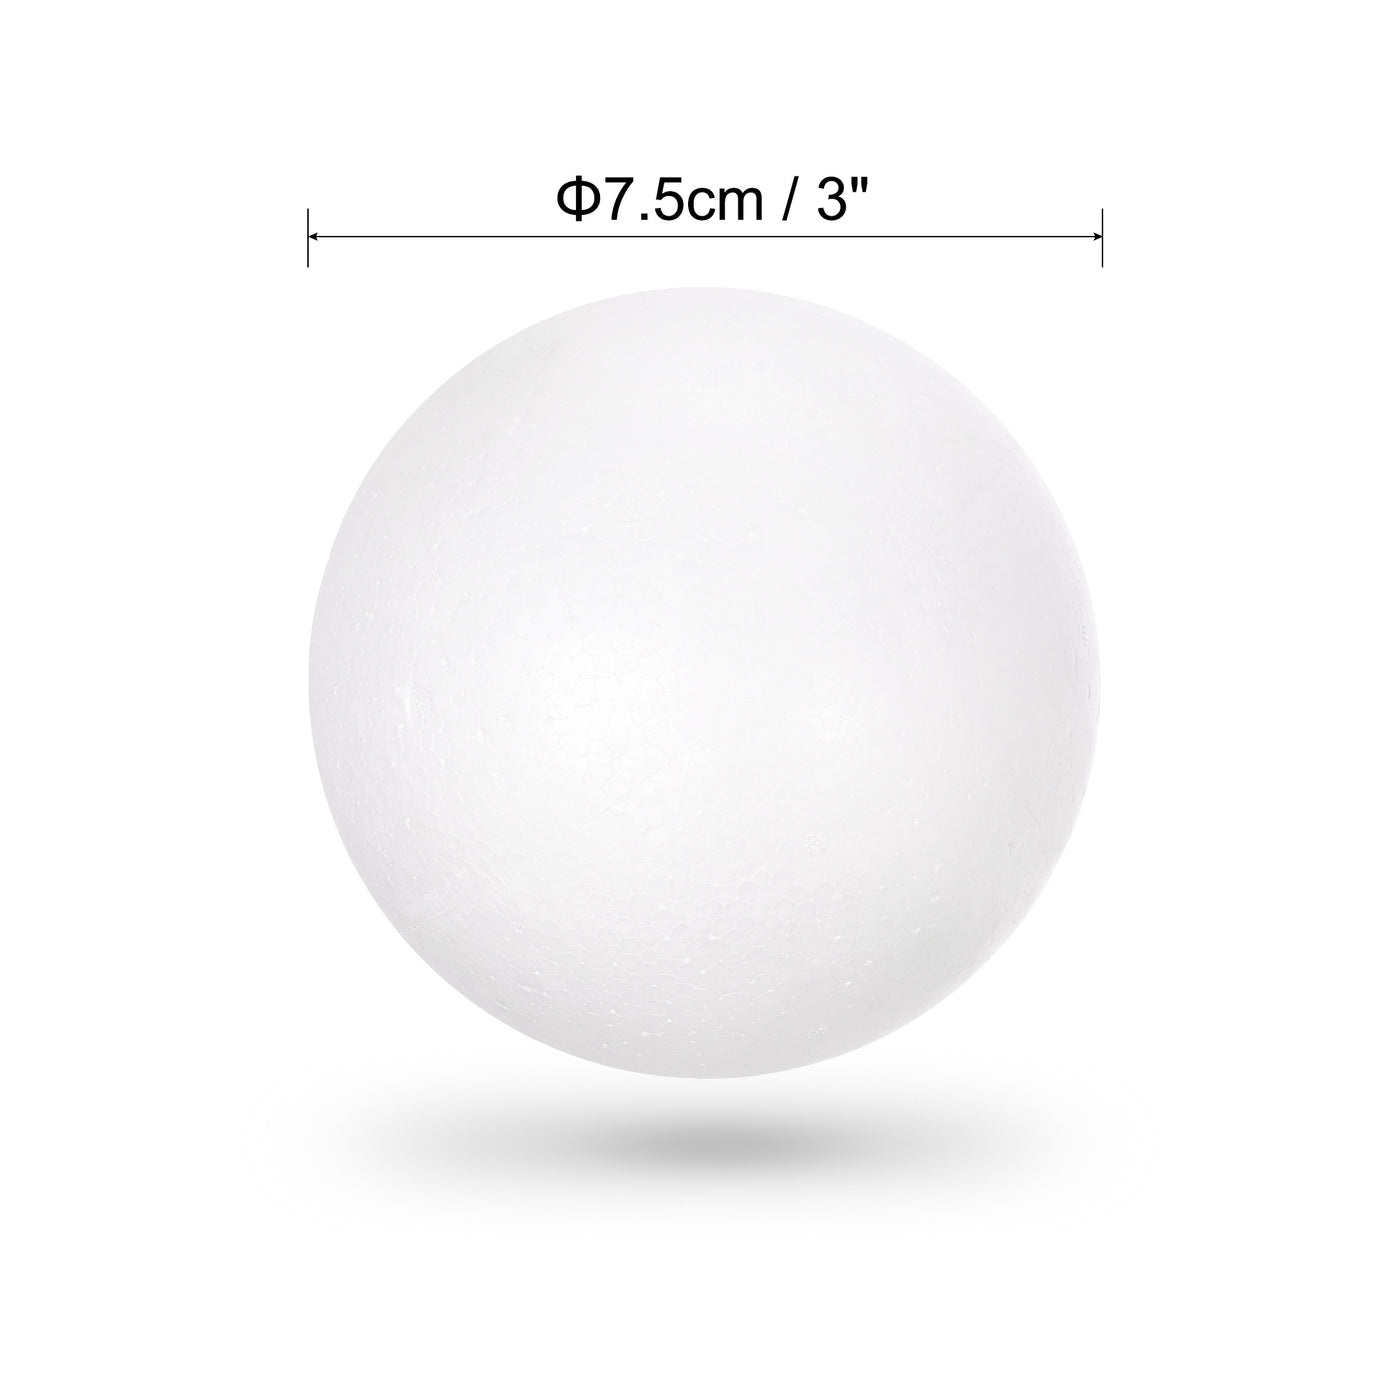 Uxcell Uxcell 6Pcs 3" White Polystyrene Foam Solid Balls for Crafts and Party Decorations